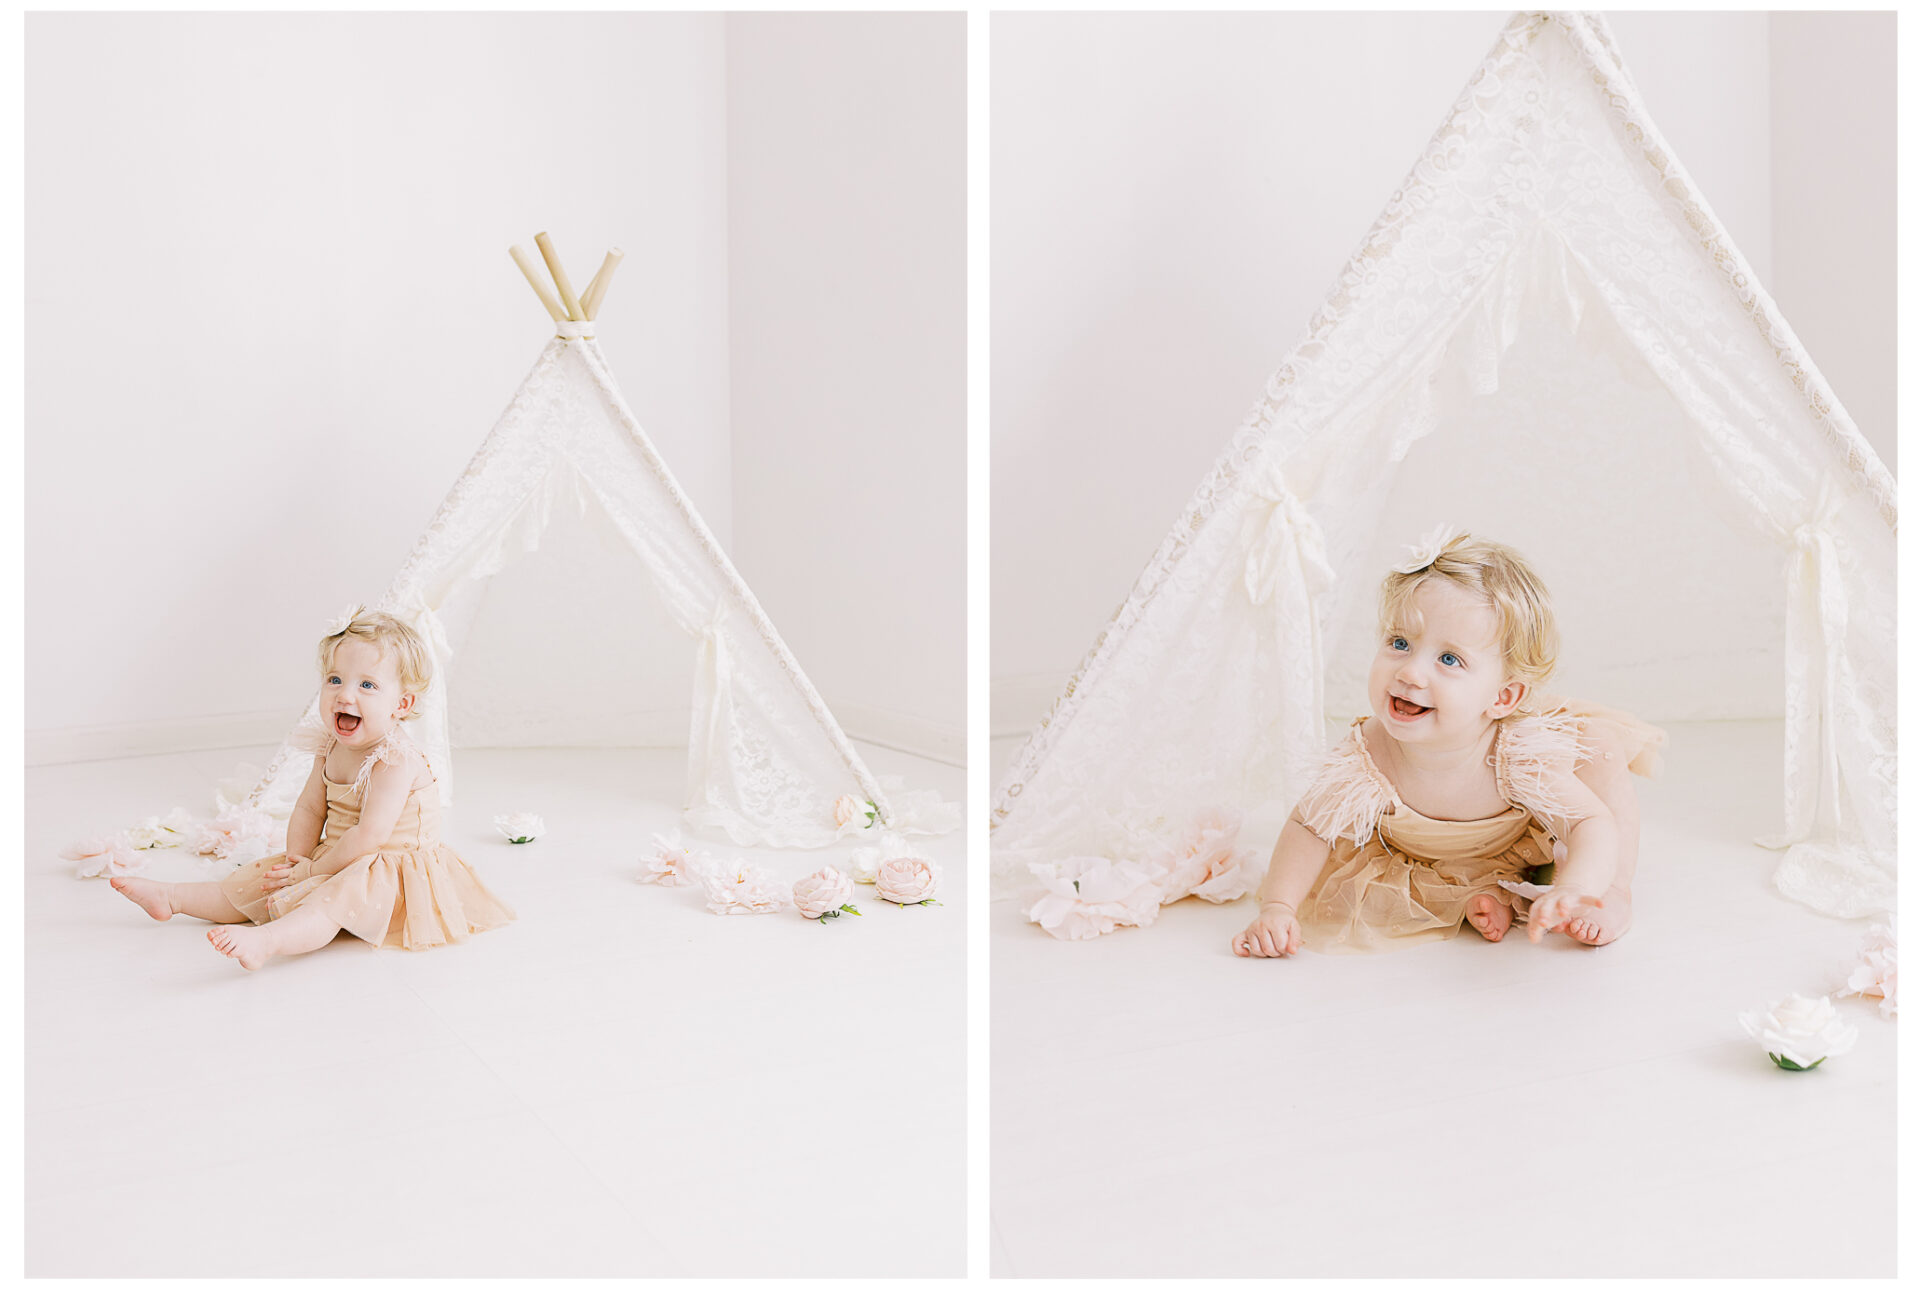 Winter Freire Photography | baby's first birthday celebration photos in a light and airy photography studio Dayton, Ohio